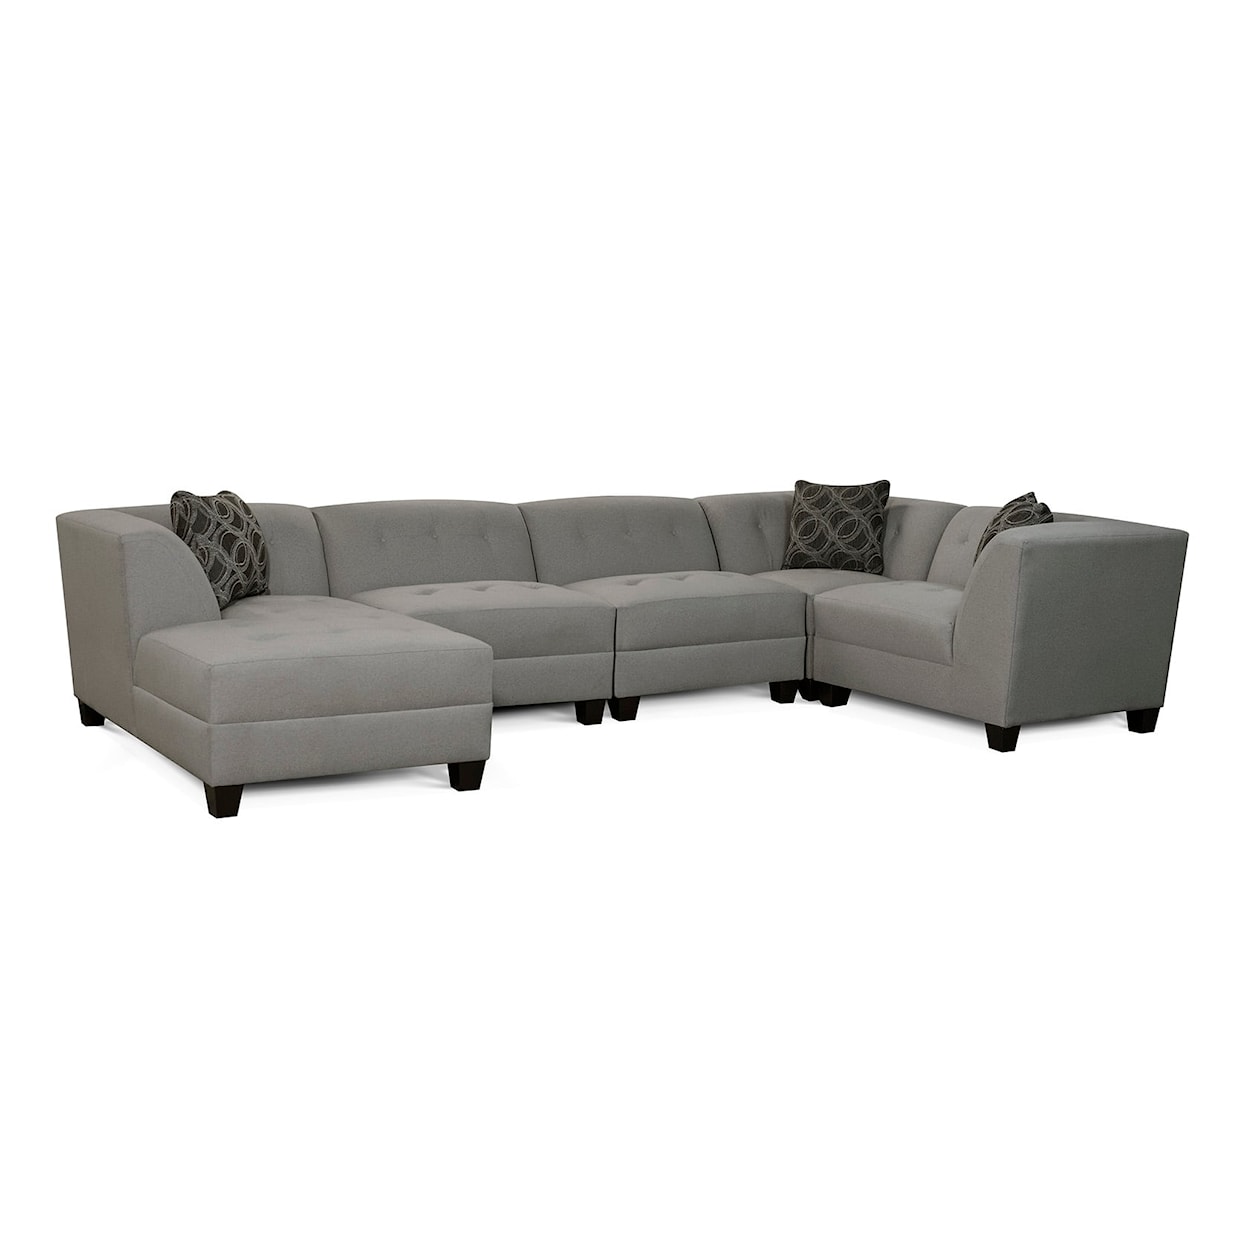 England 4M00 Series 5-Piece Chaise Sectional Sofa